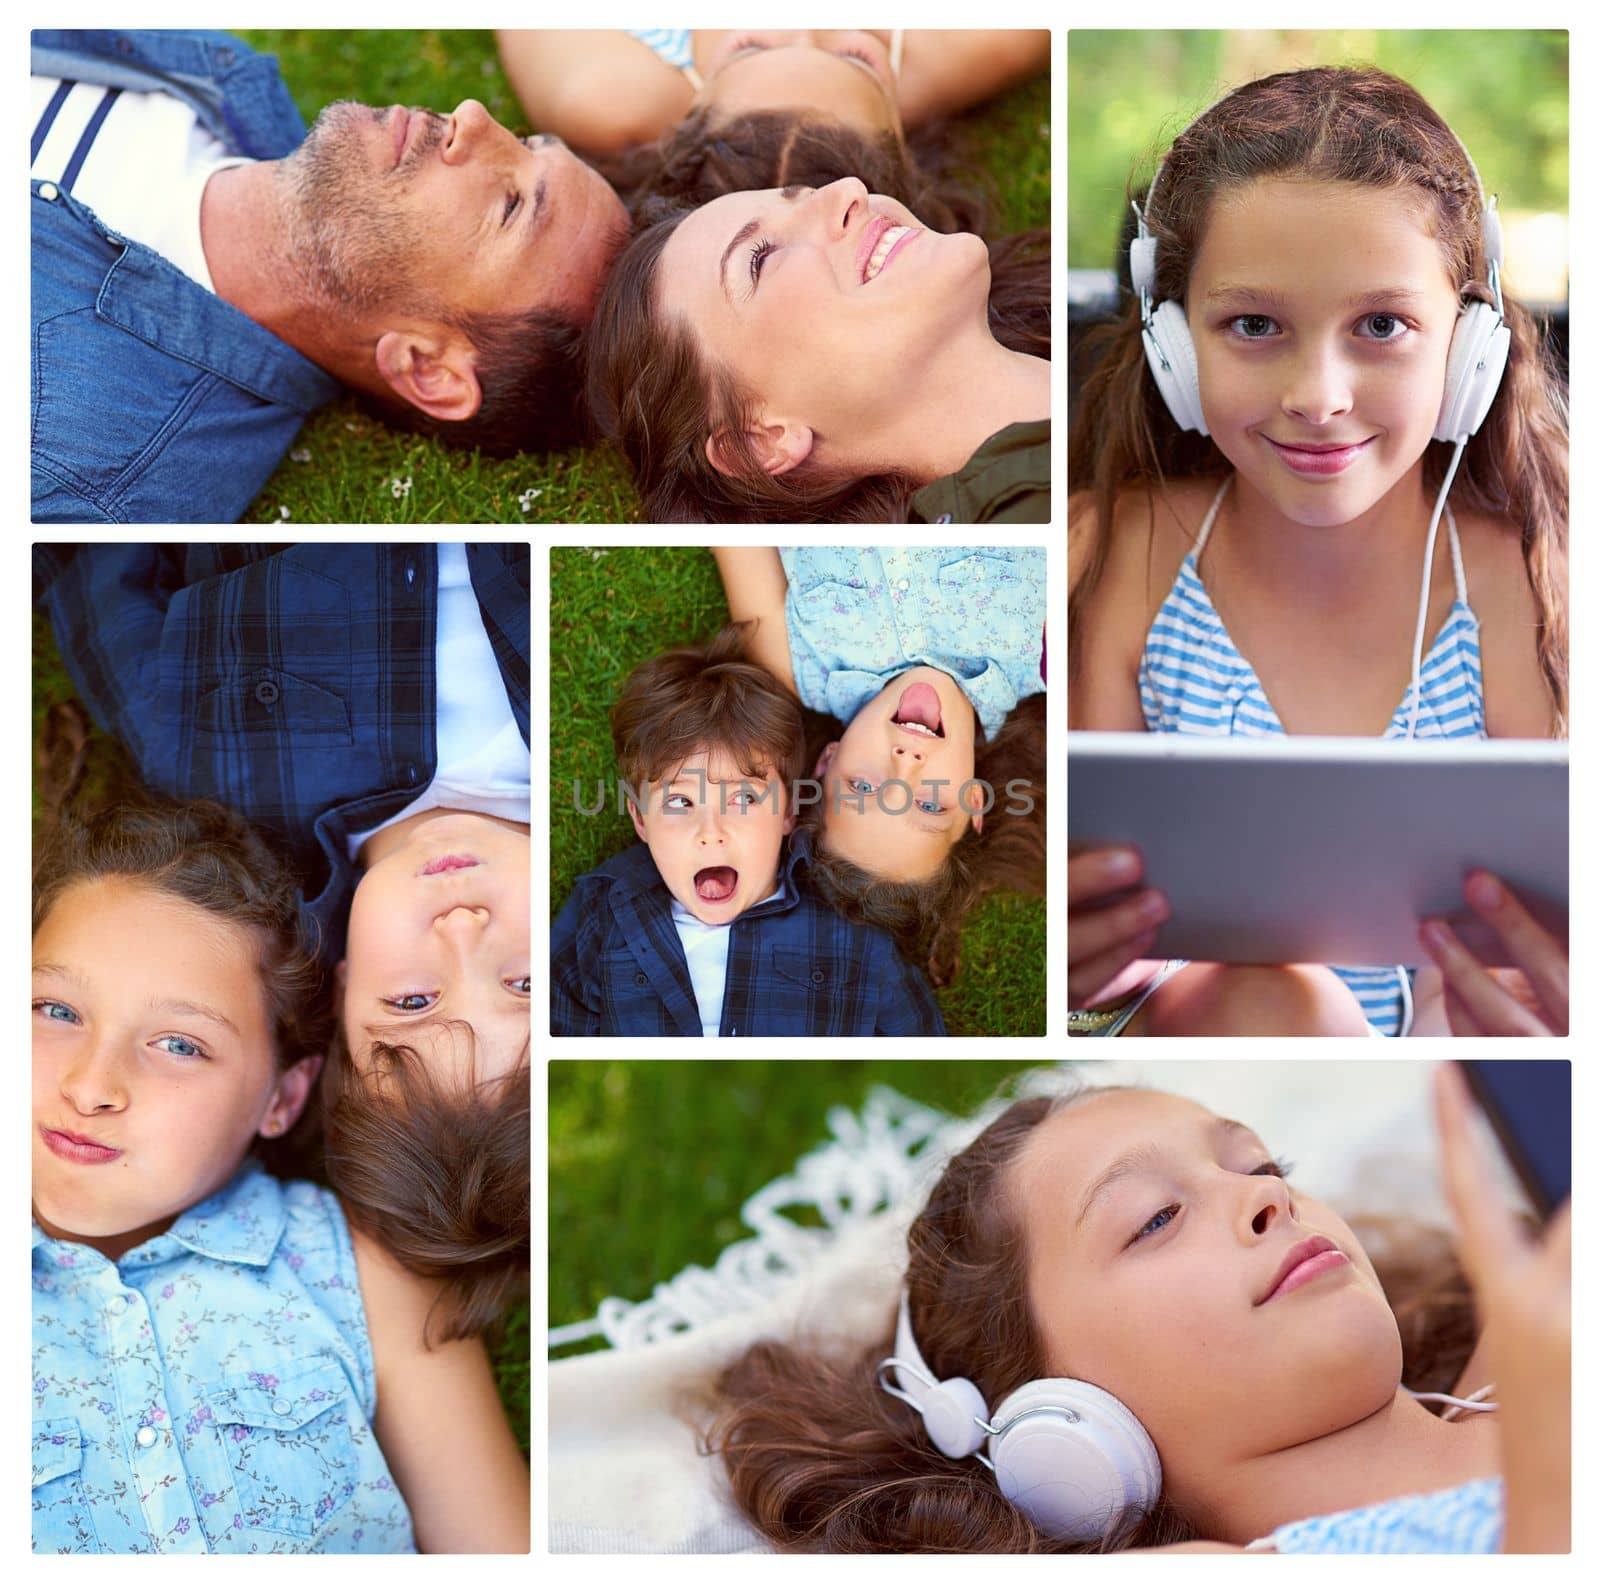 This family loves the outdoors. Composite image of different members of a family relaxing outdoors. by YuriArcurs